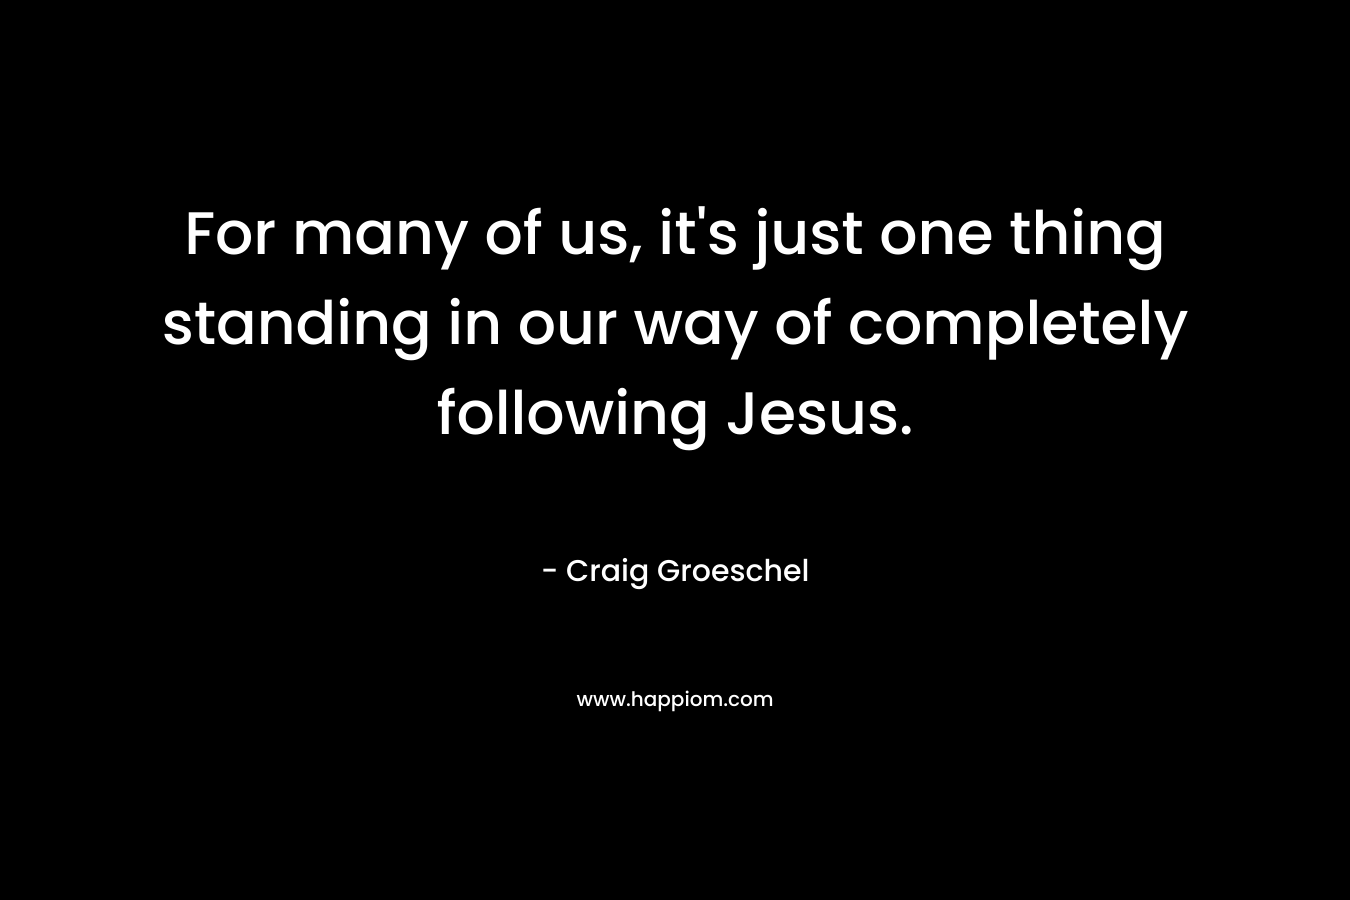 For many of us, it's just one thing standing in our way of completely following Jesus.